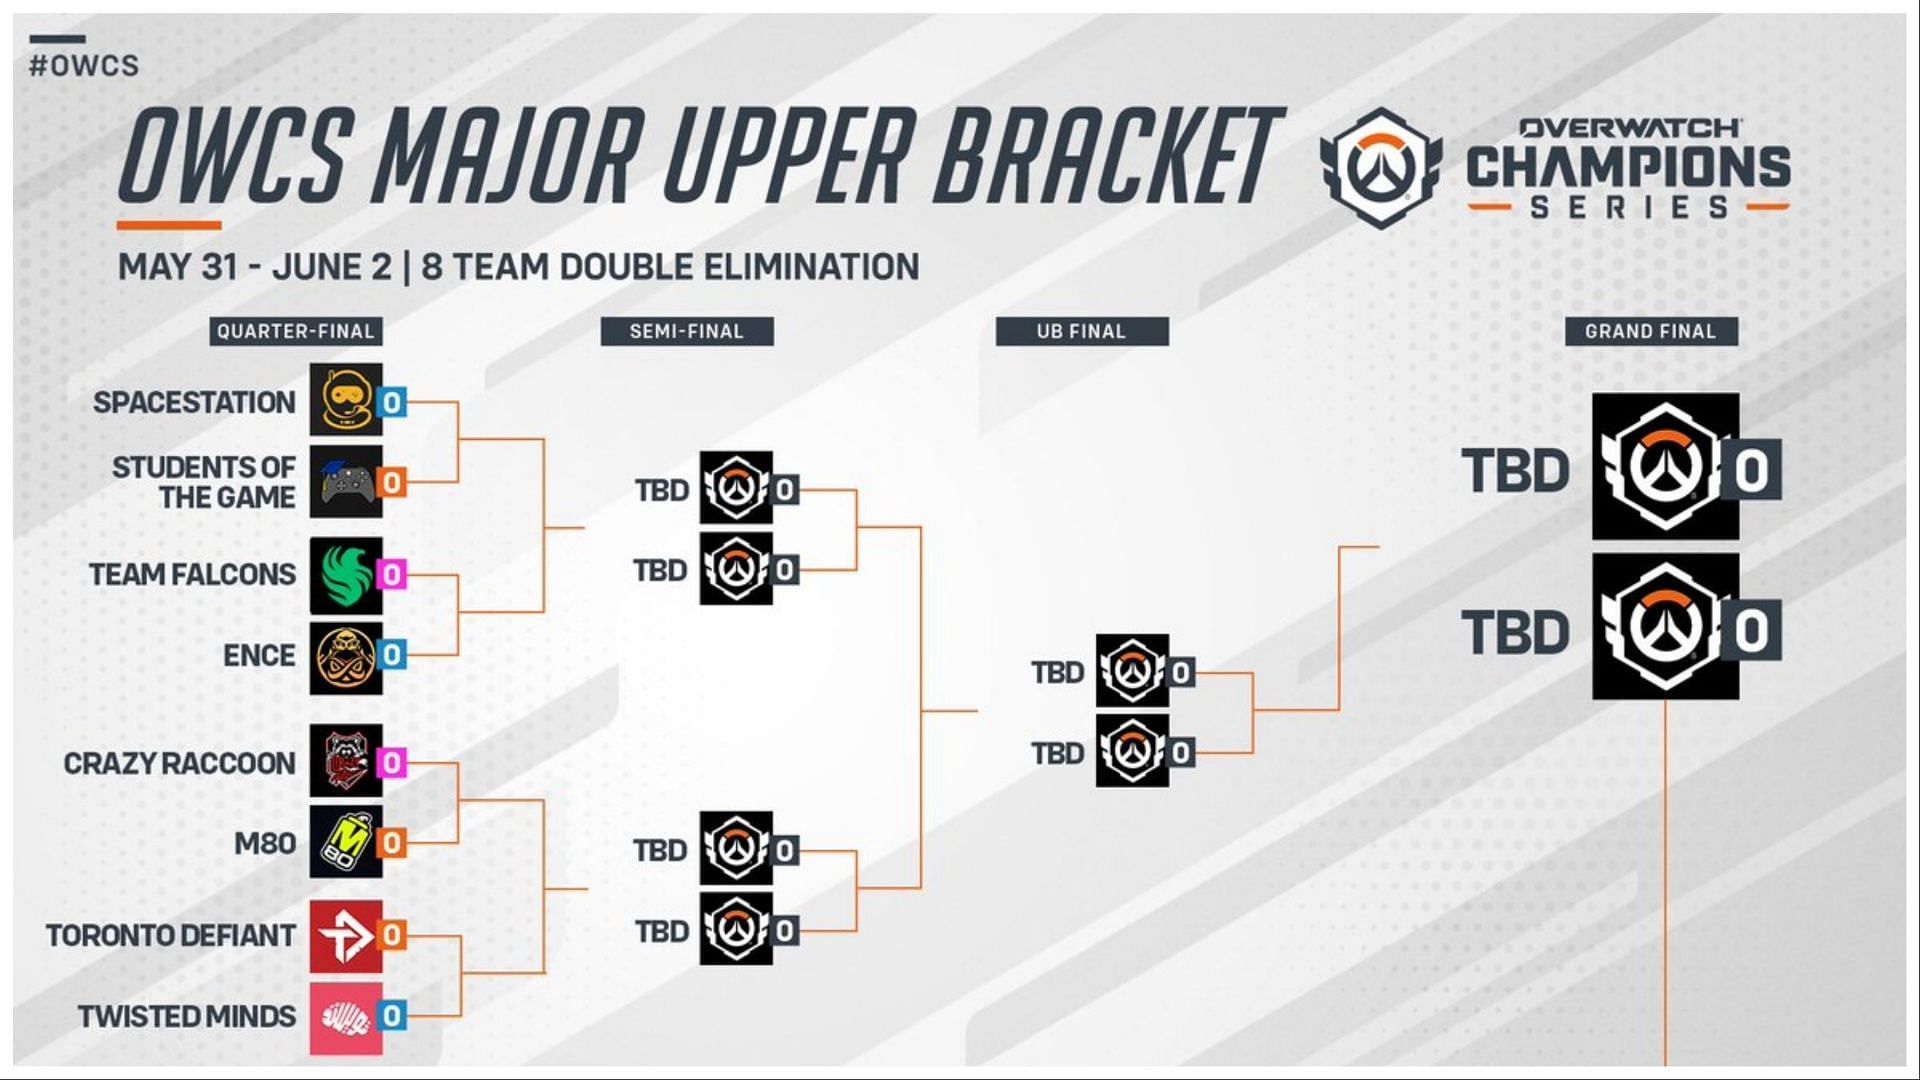 Schedule and matchups for the Upper Bracket (Image via Overwatch Esports)